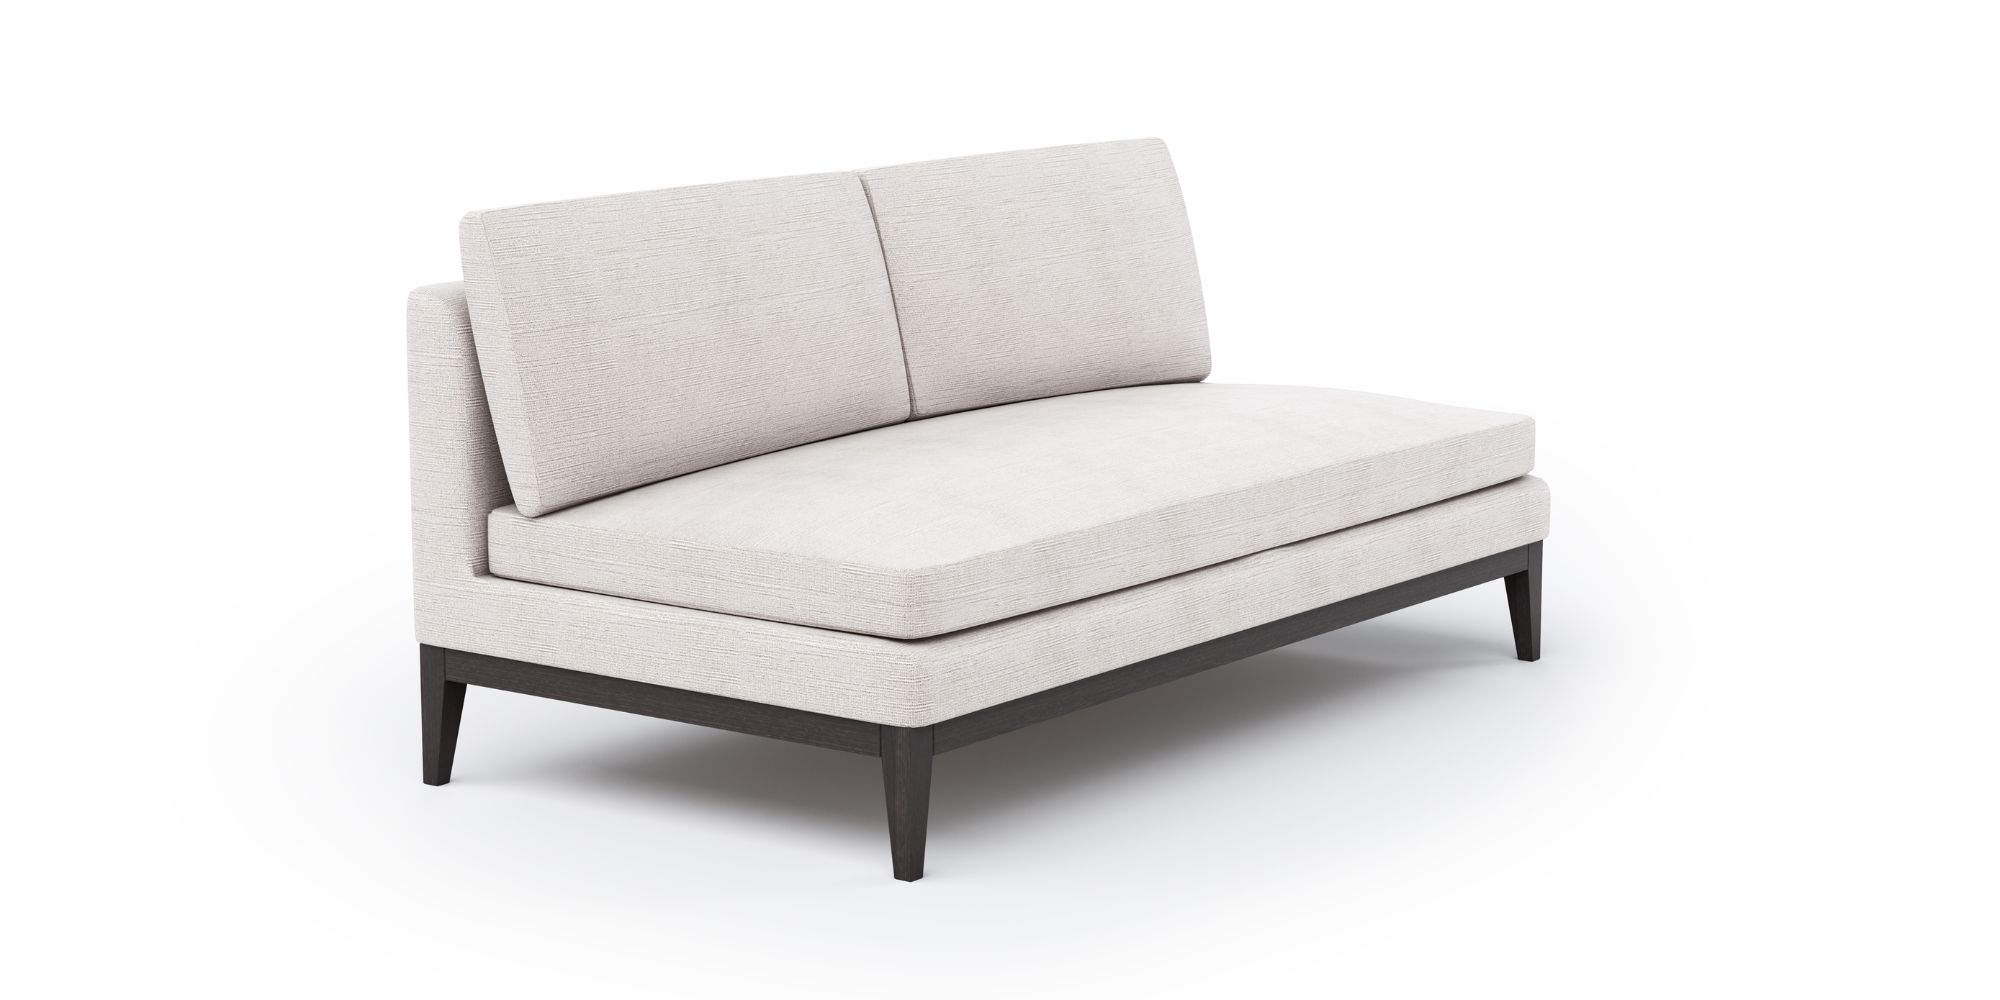 Tamarindo Right Arm/End Section 2 Seater in Outdoor Modular Sofas for Tamarindo collection